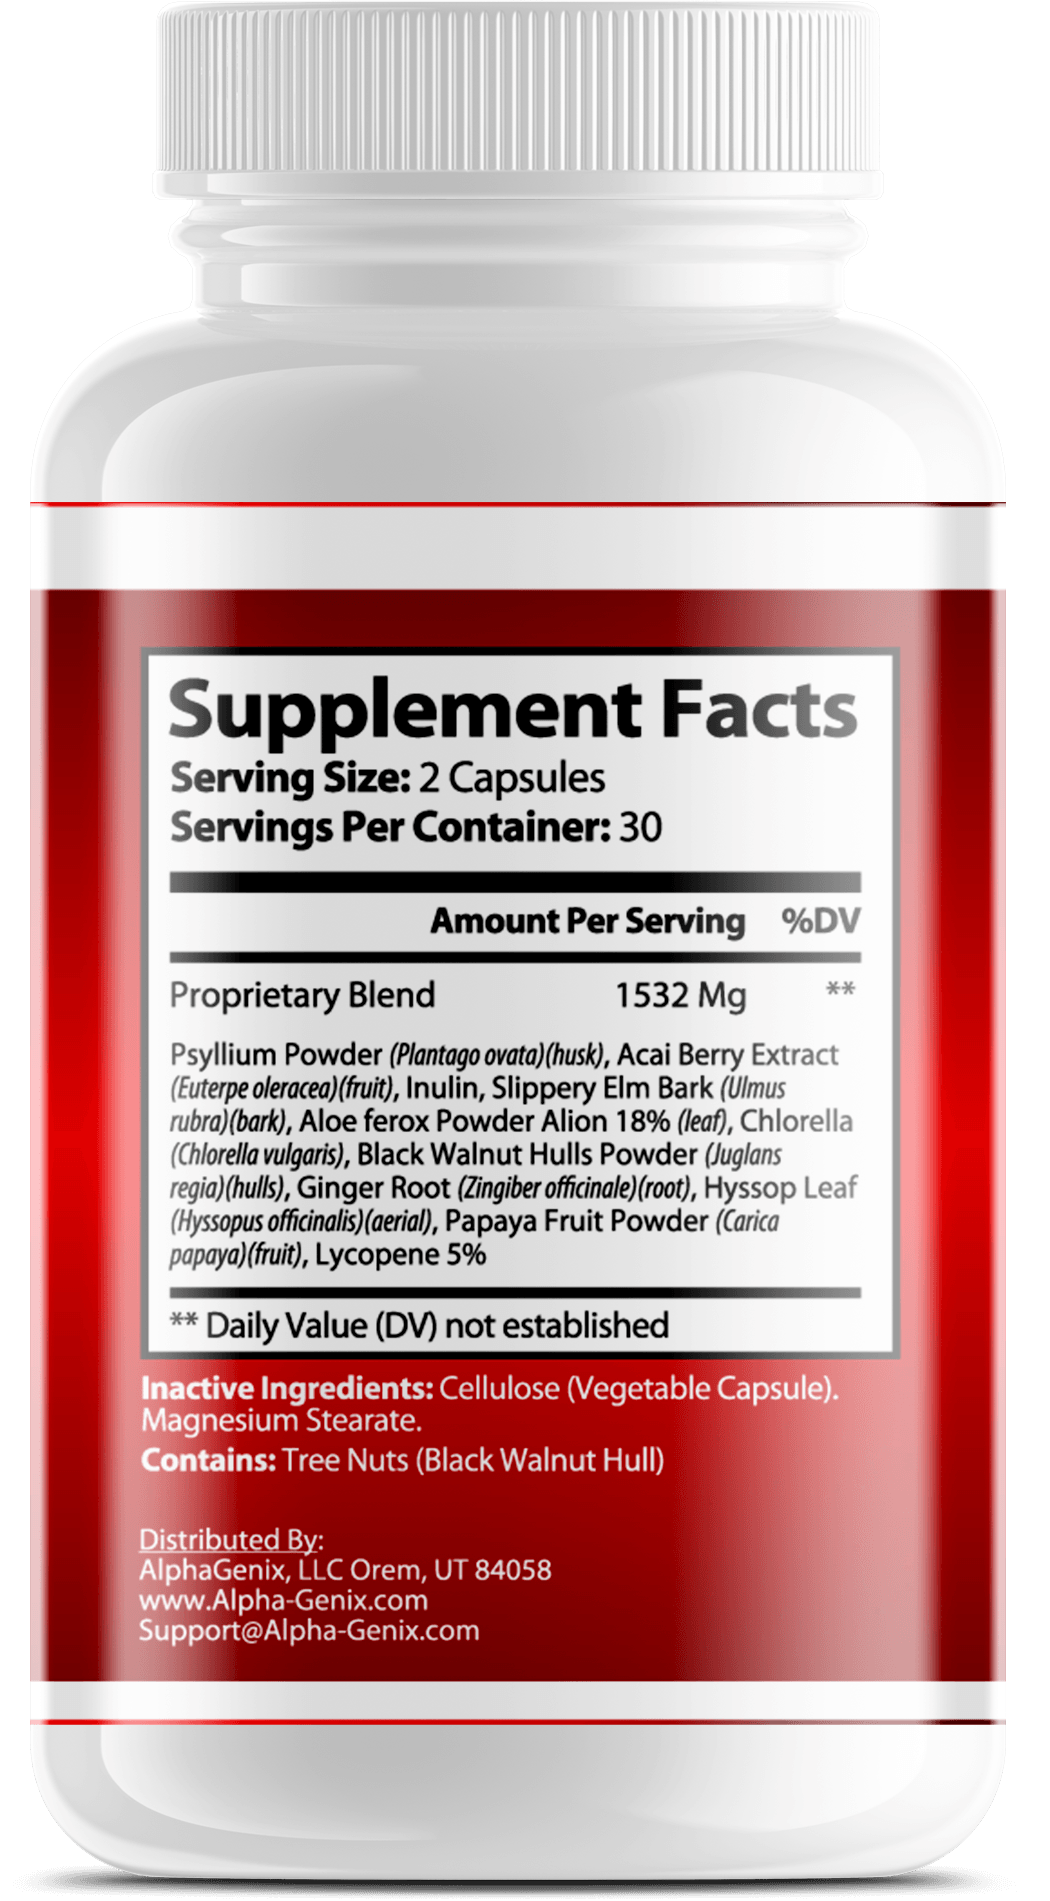 AlphaGenix PowerDetox Back-of-bottle-2 Showing Ingredients and Supplement Facts